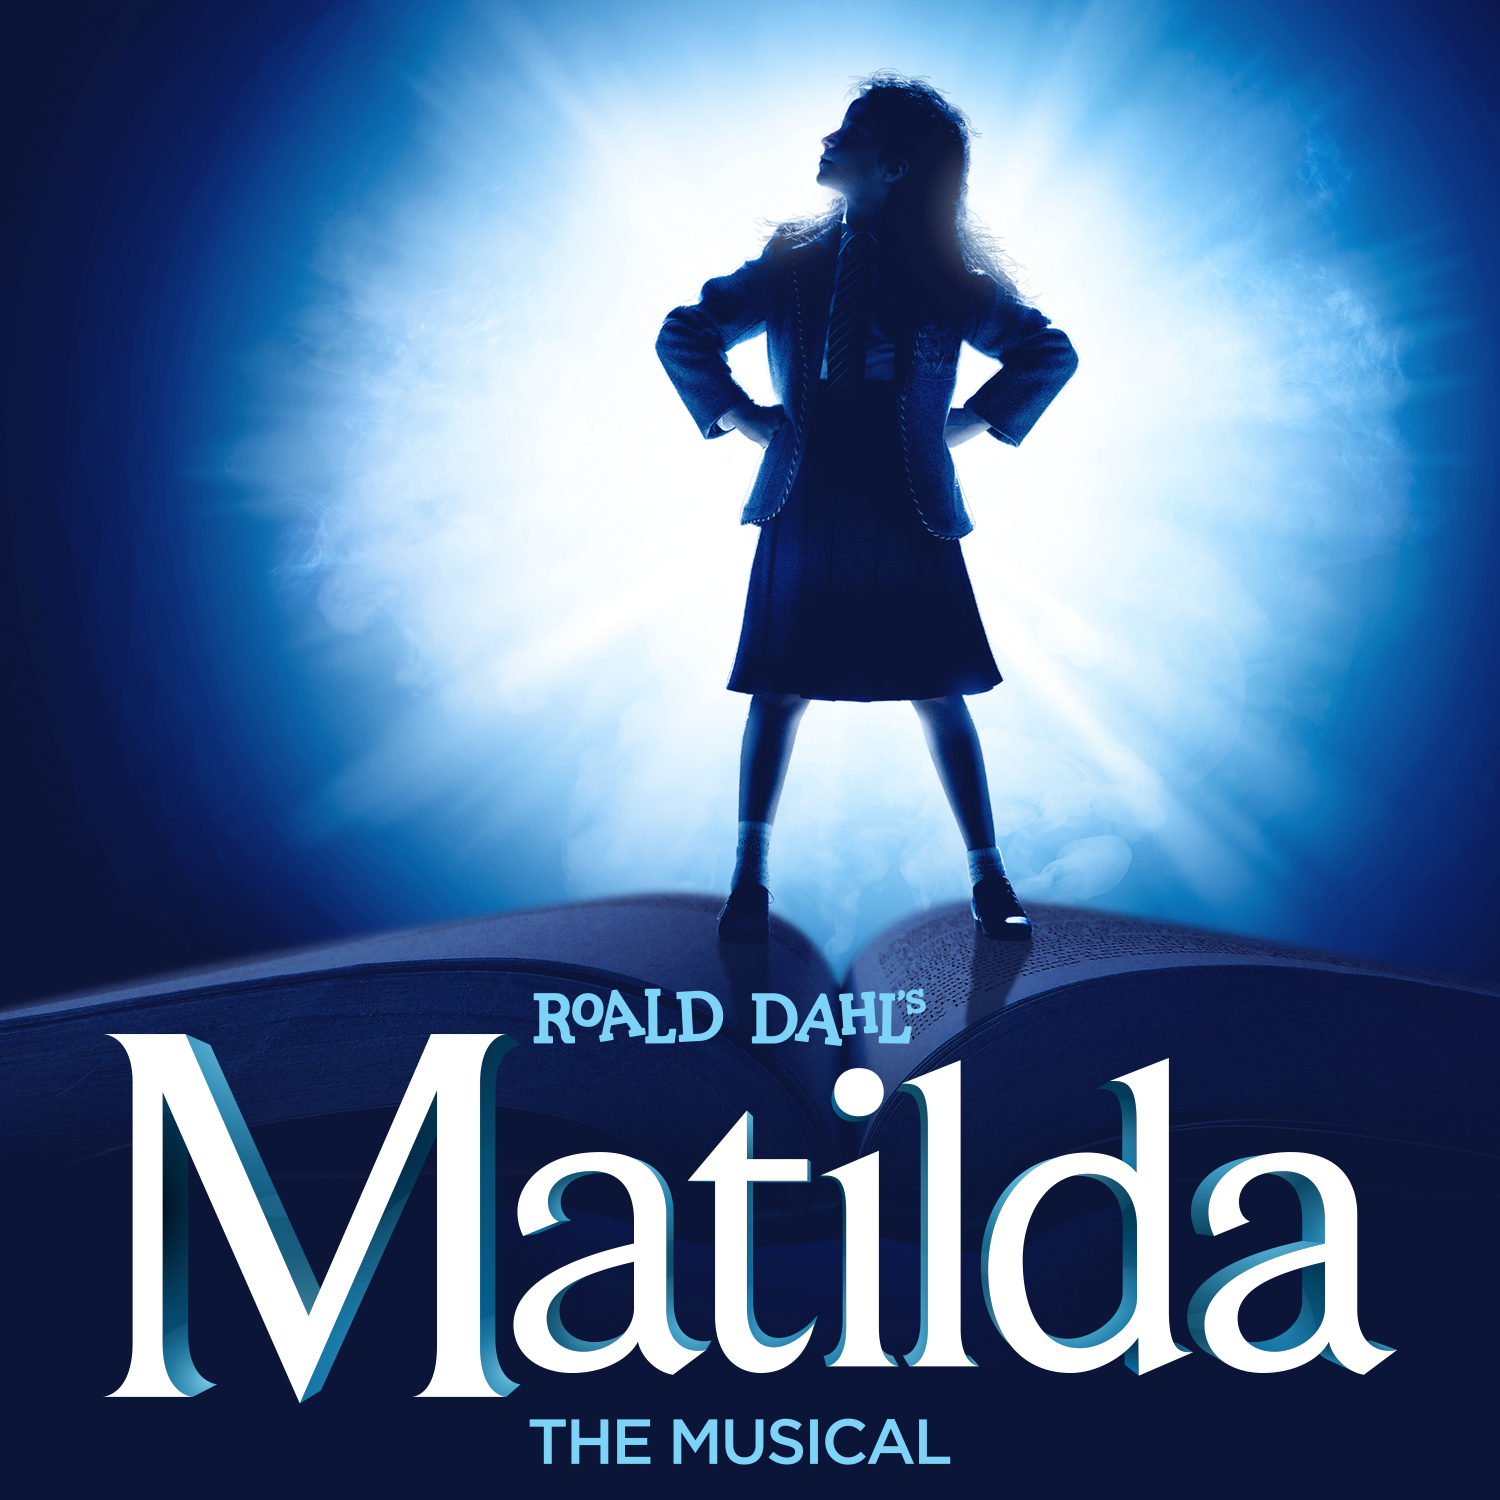 Matilda the Musical Hotel Packages - New Year’s Eve Niagara Falls